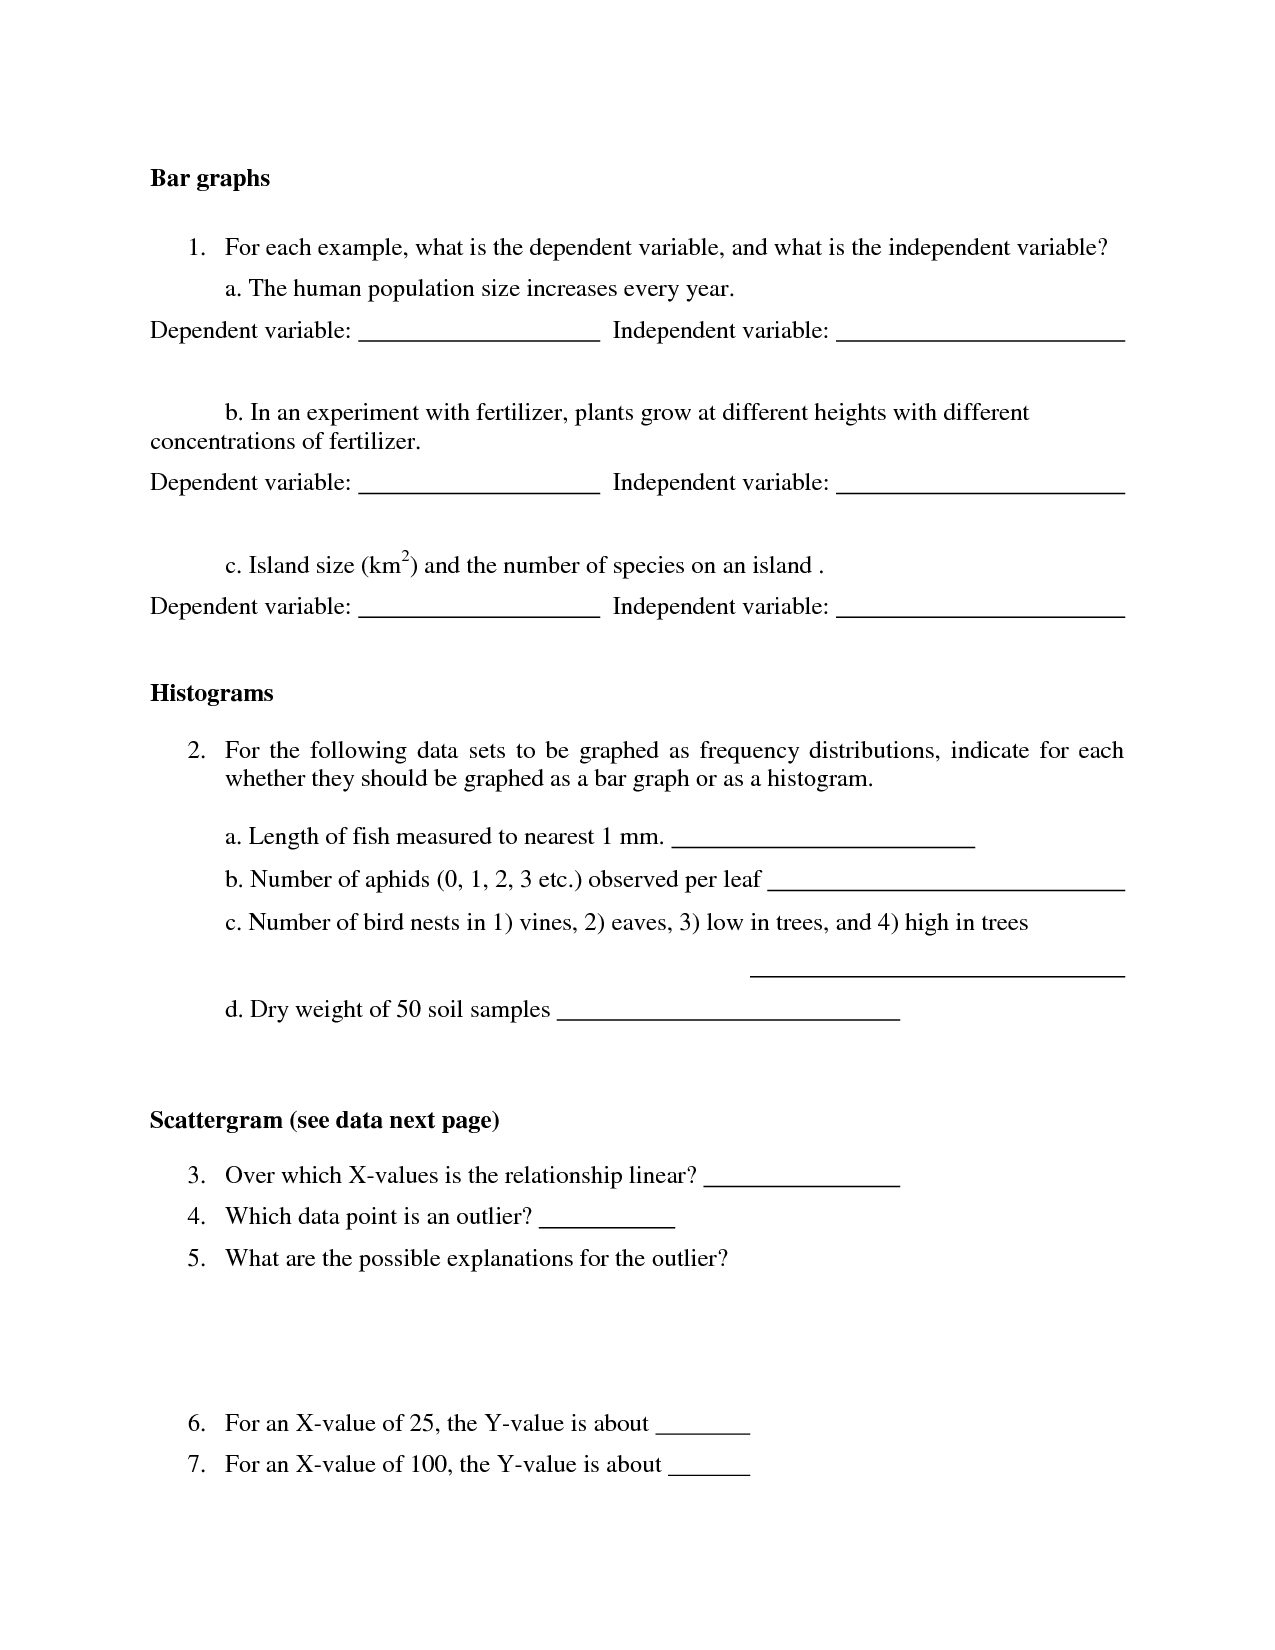 22 Best Images of Simpsons Variable Worksheet Answer Key Writing For Writing A Hypothesis Worksheet